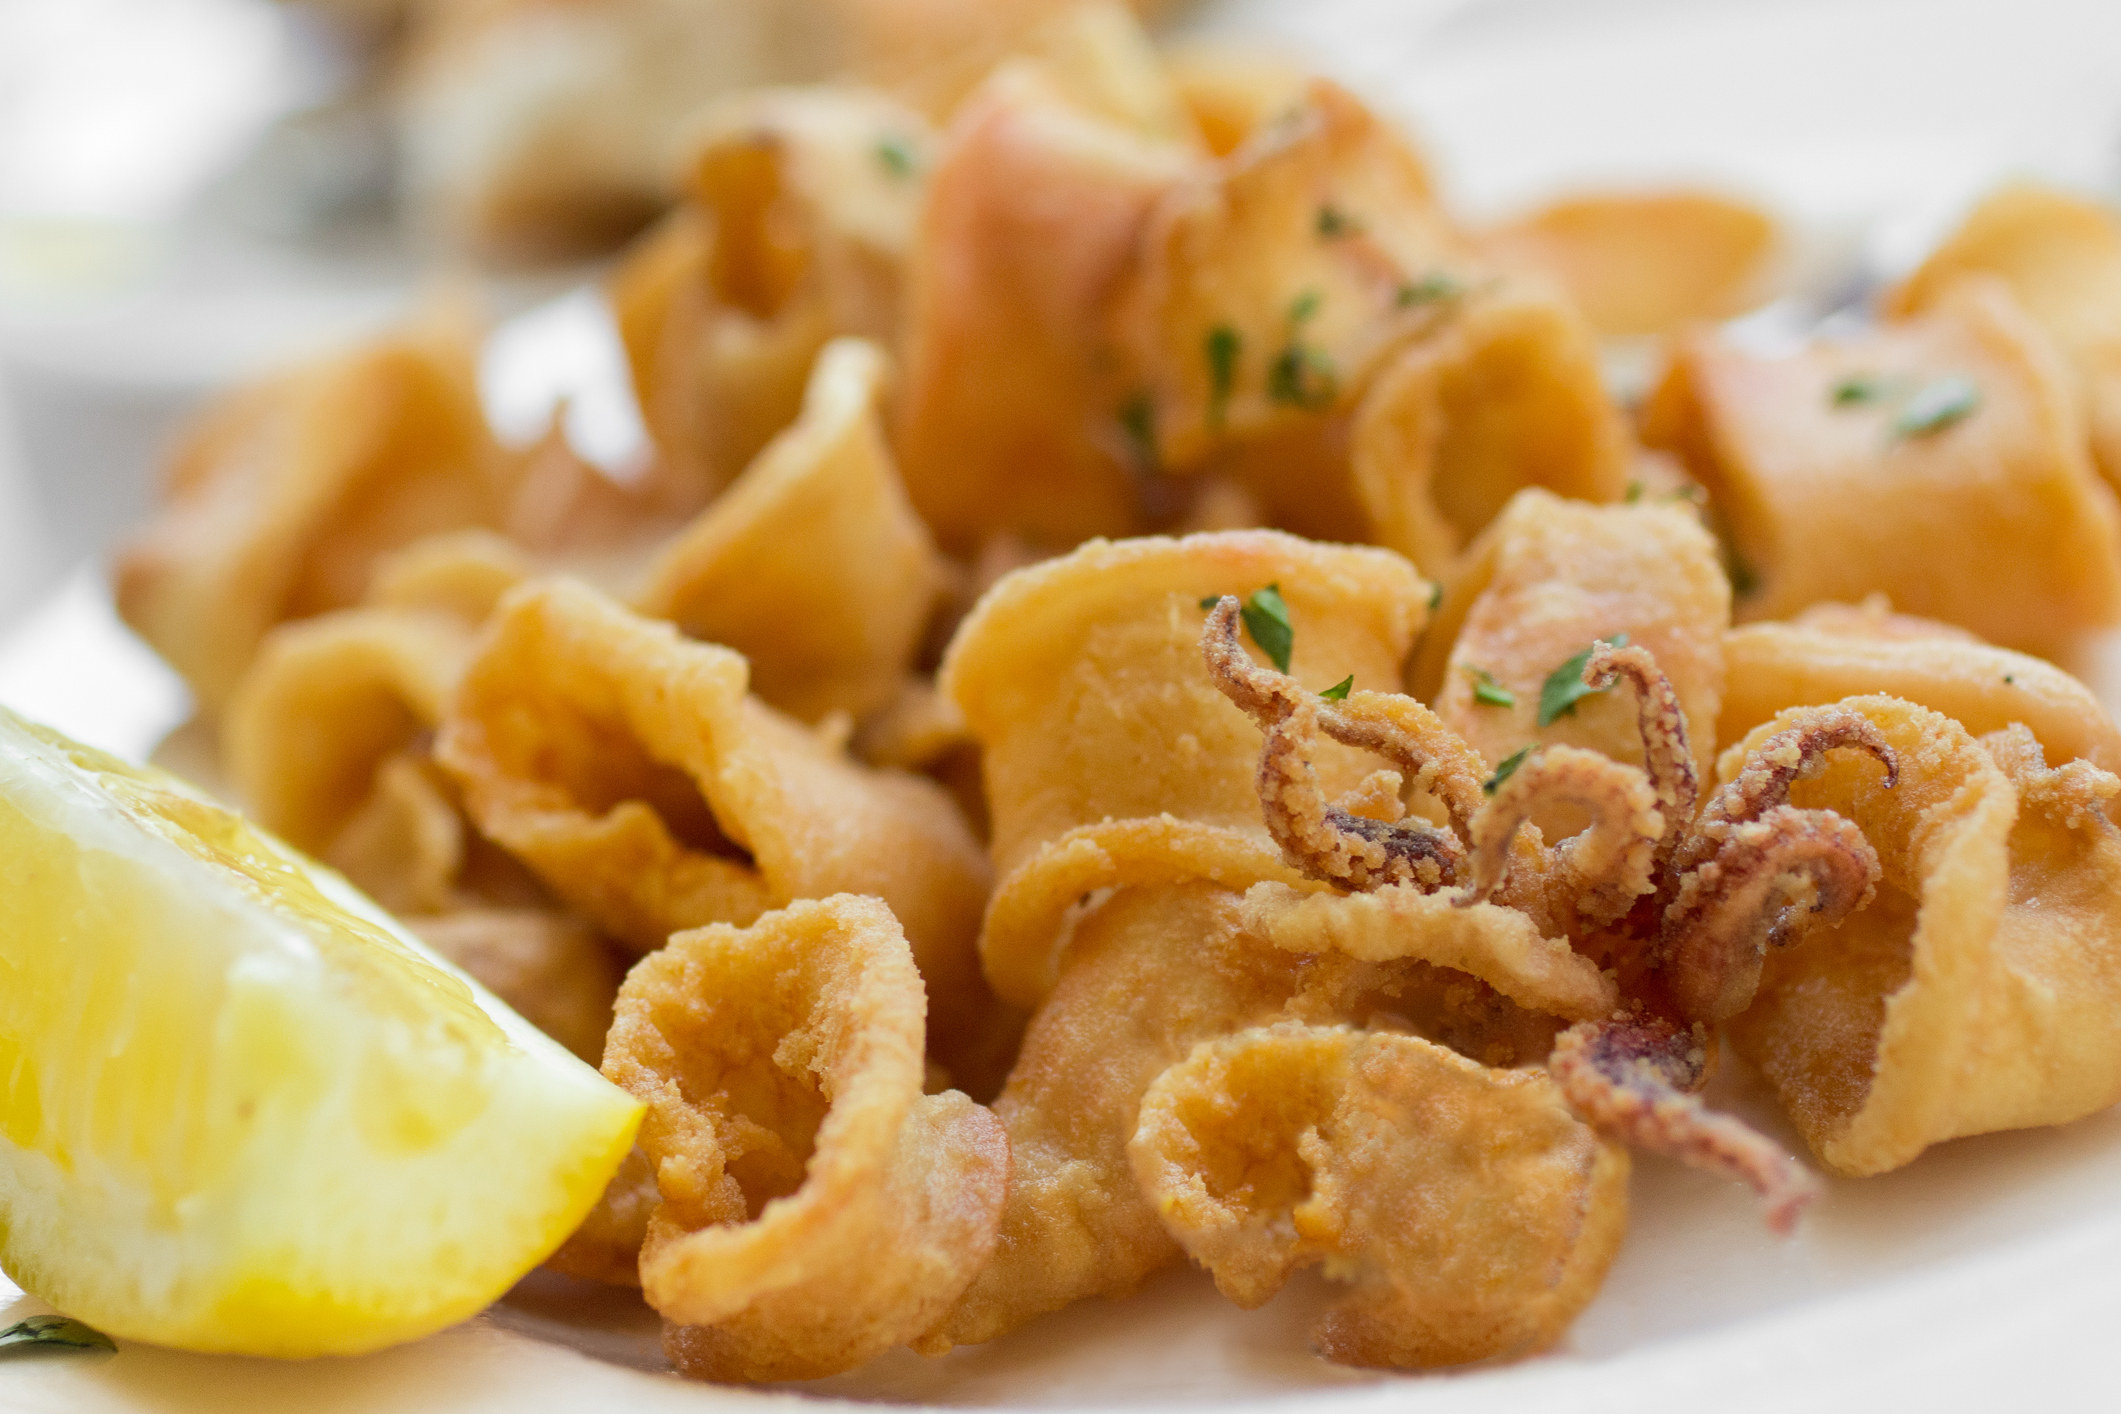 Traditional Italian style fried calamari with a wedge of lemon on the side.